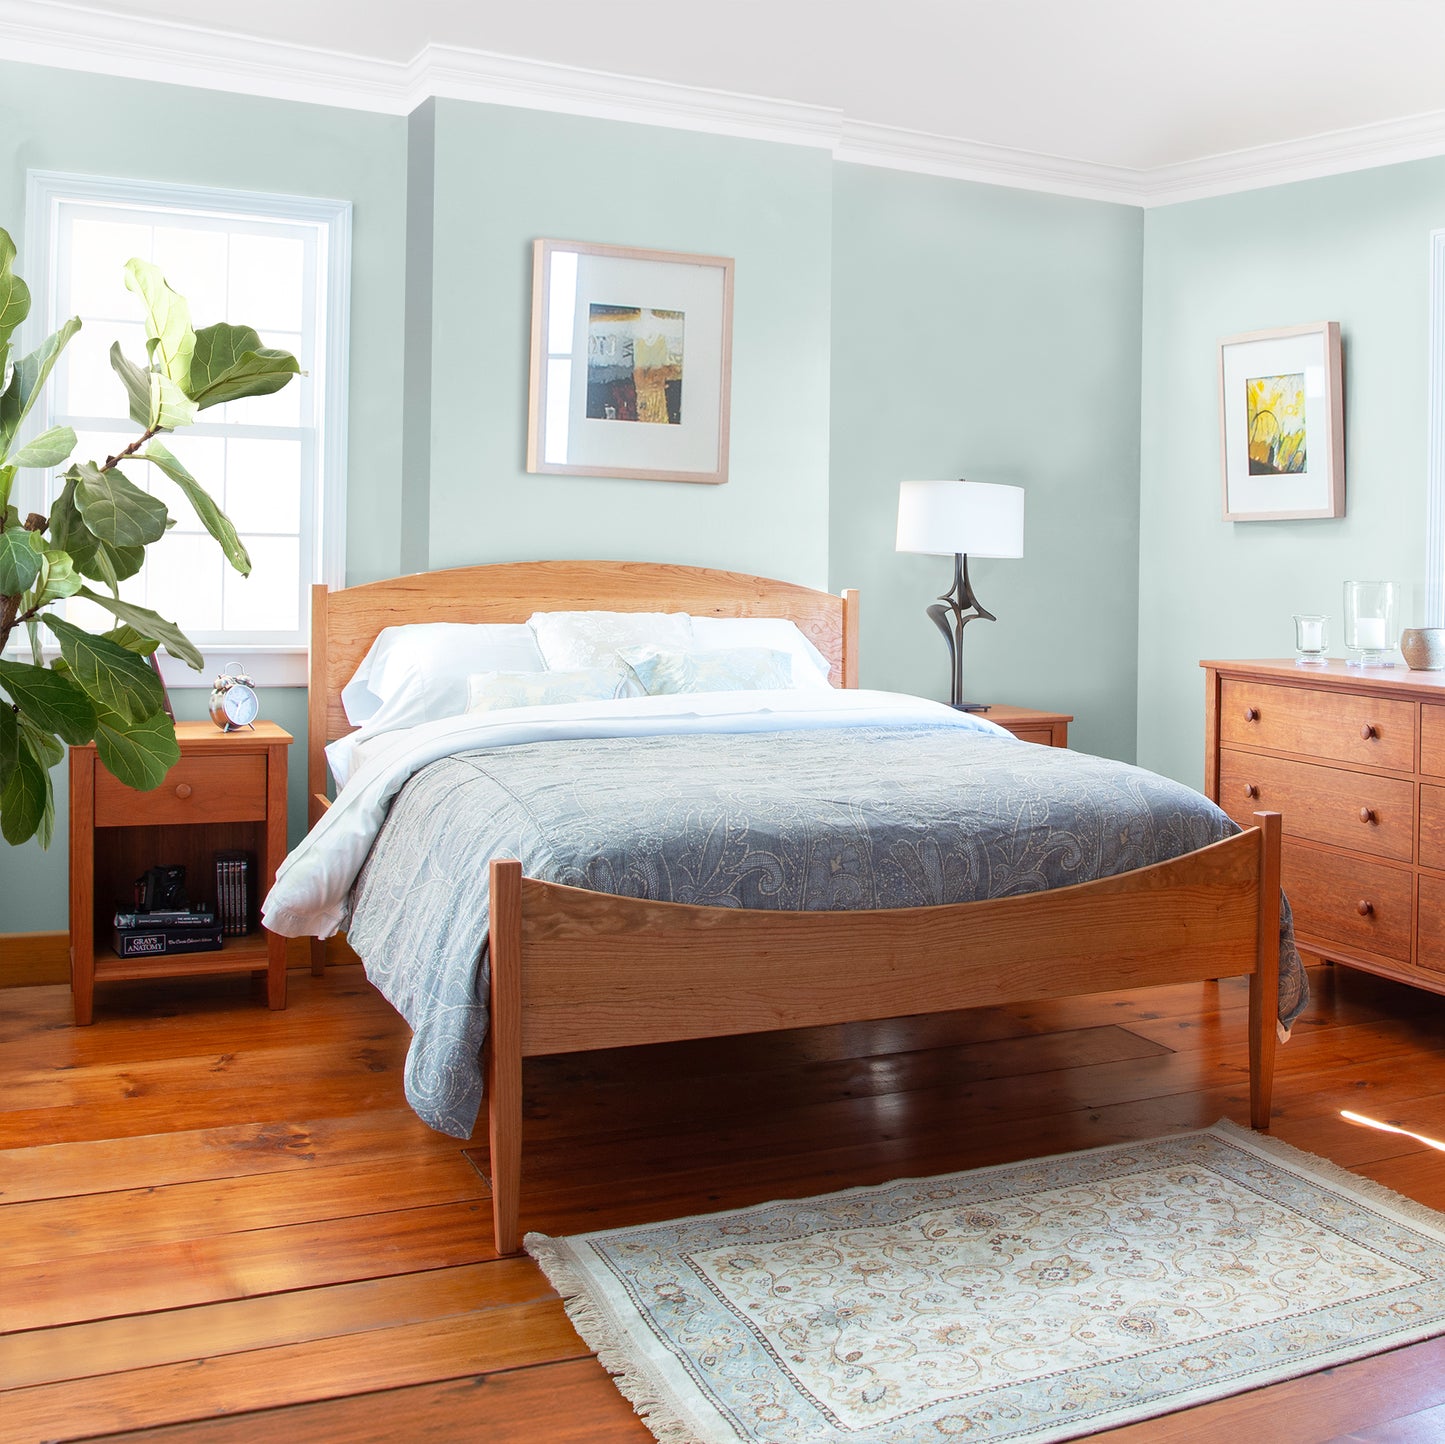 A neatly presented bedroom with a Vermont Shaker Moon platform bed, matching dresser, and side table from the Maple Corner Woodworks Vermont Shaker Furniture Collection, set against a light green wall with framed artwork.